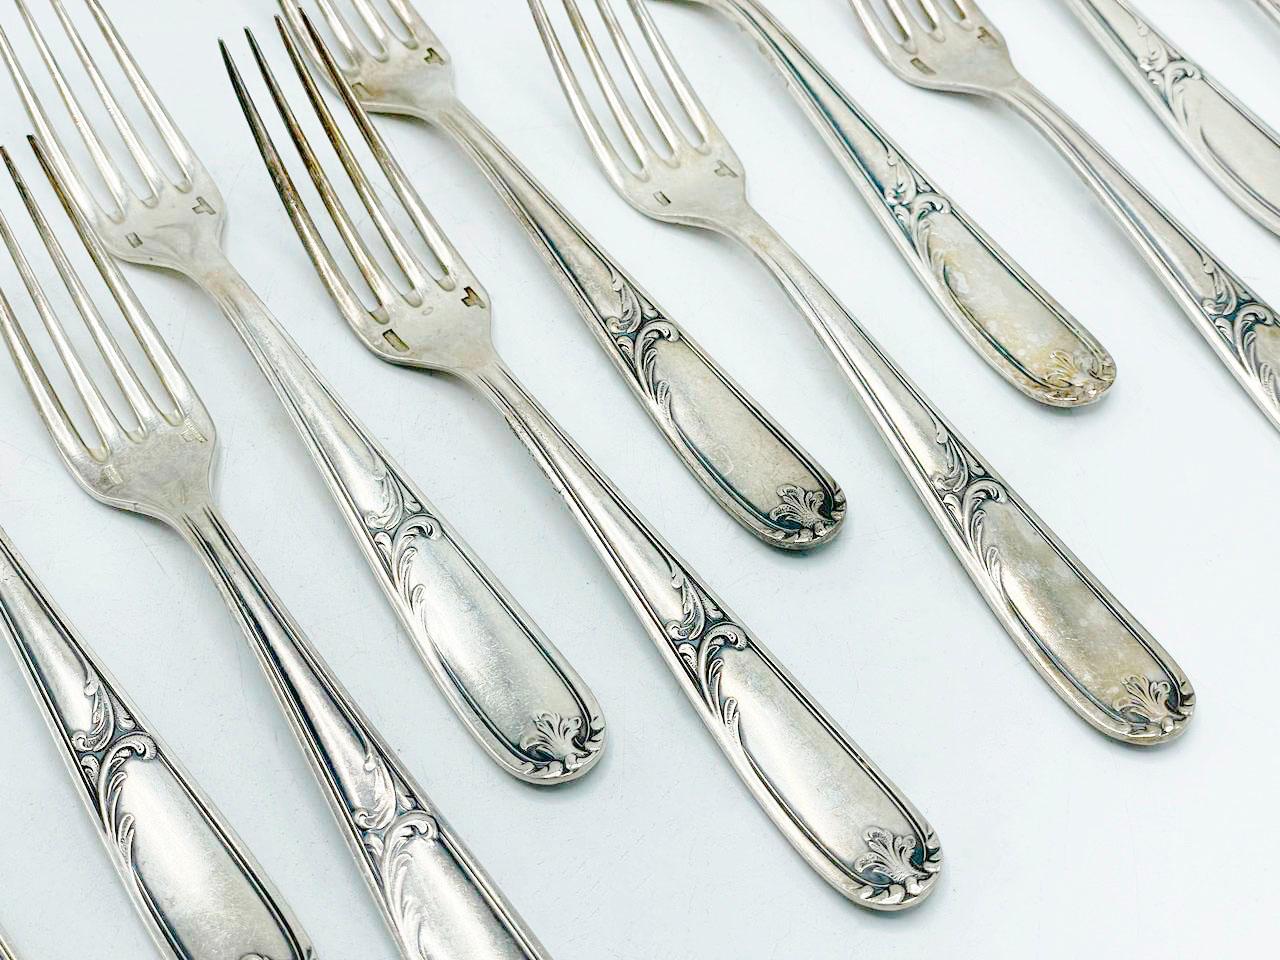 Christofle Made in Argentina, Flatware art nouveau in Silverplated For Sale 7